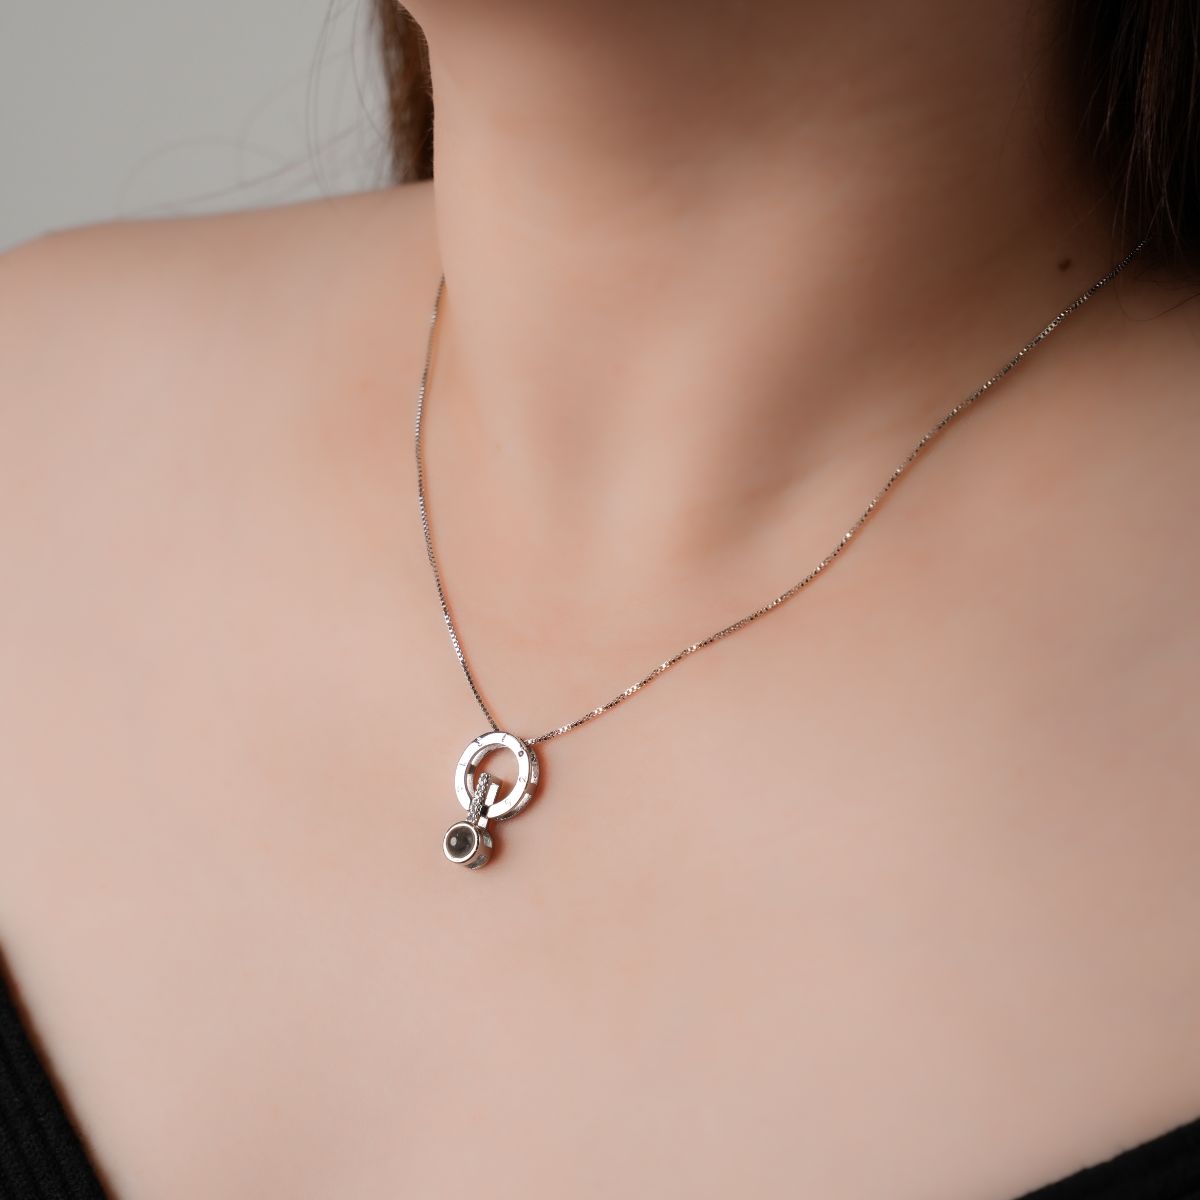 https://m.clubbella.co/product/hundred-love-projected-2-way-necklace/ DSC01770-13